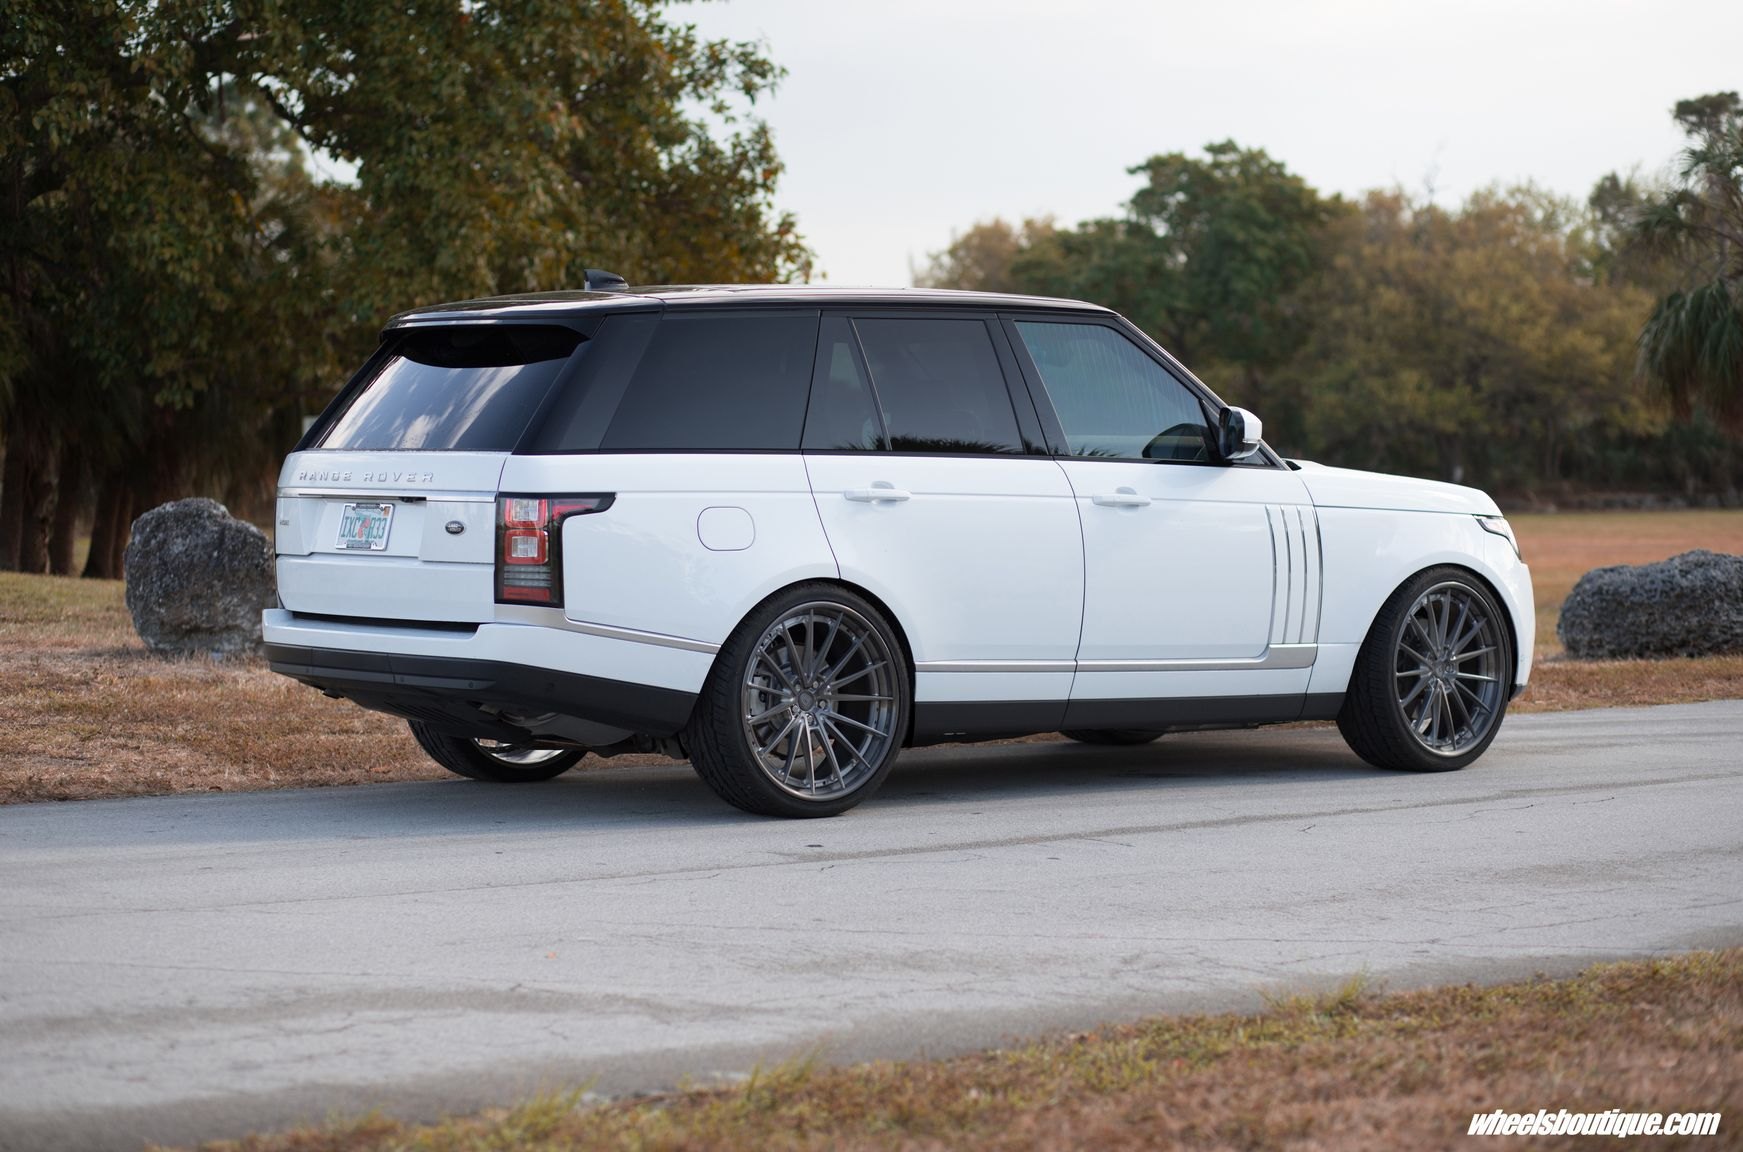 Custom Red LED Taillights on White Range Rover - Photo by Anrky Wheels